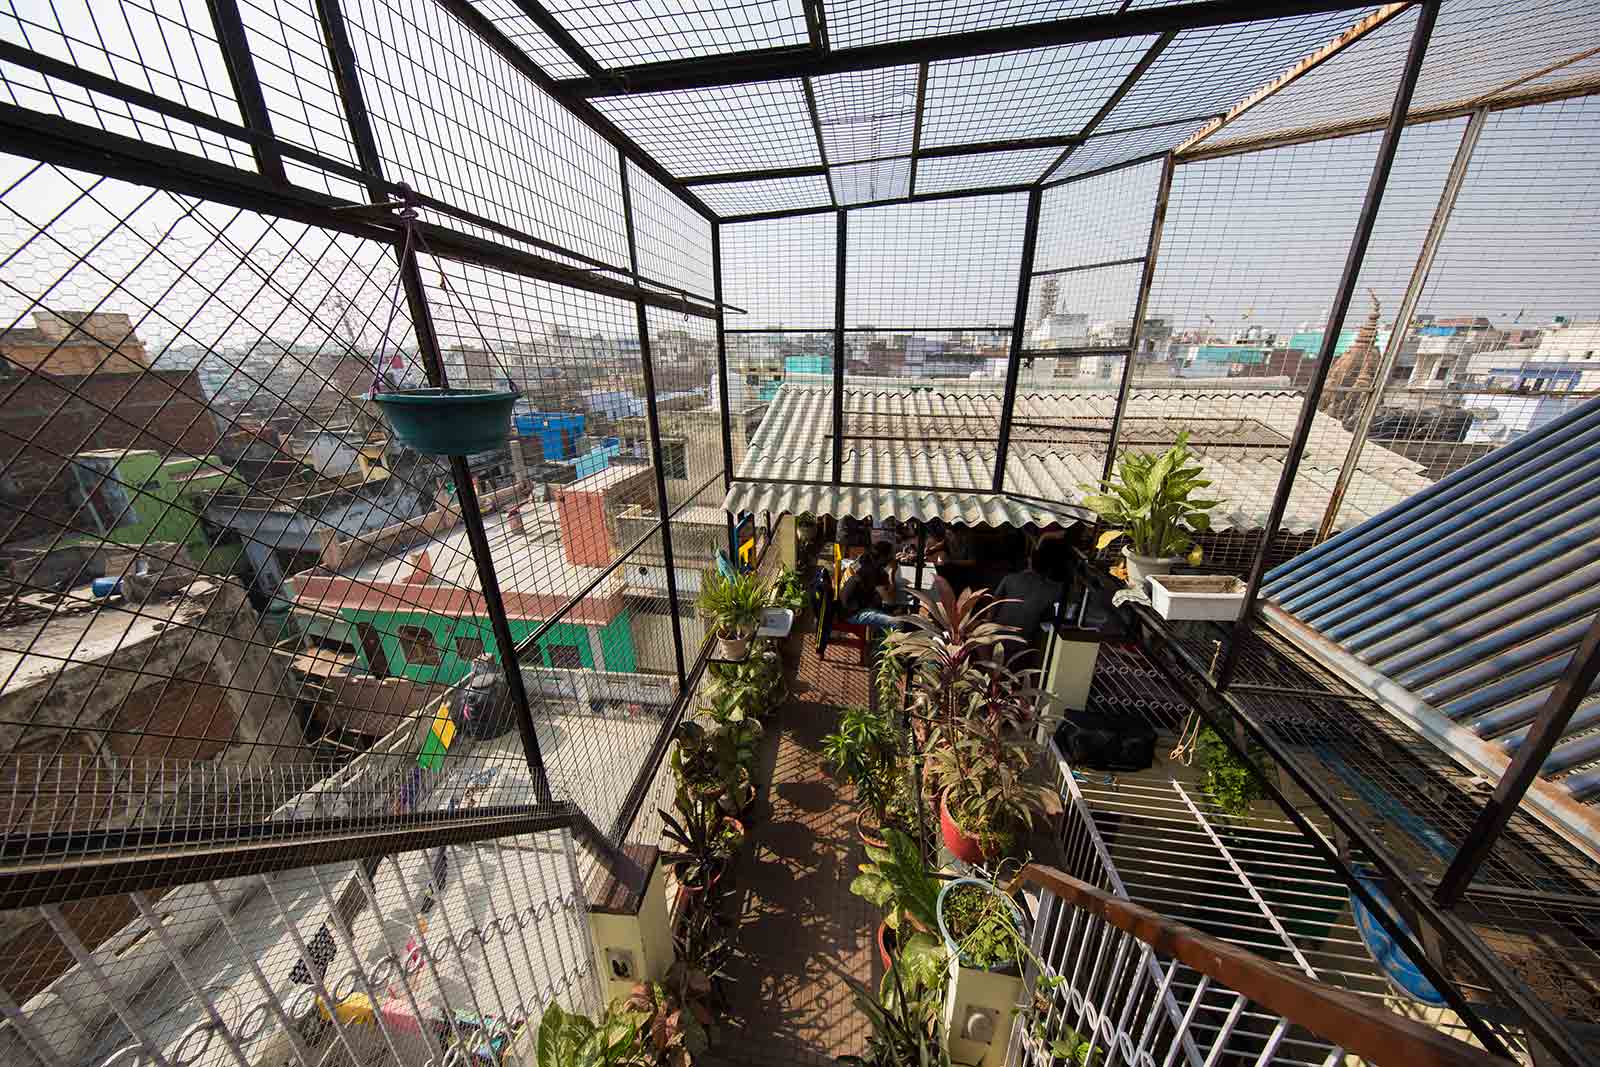 You can truly relax and enjoy the beautiful rooftop terrace of the Brown Bread Bakery in Varanasi.